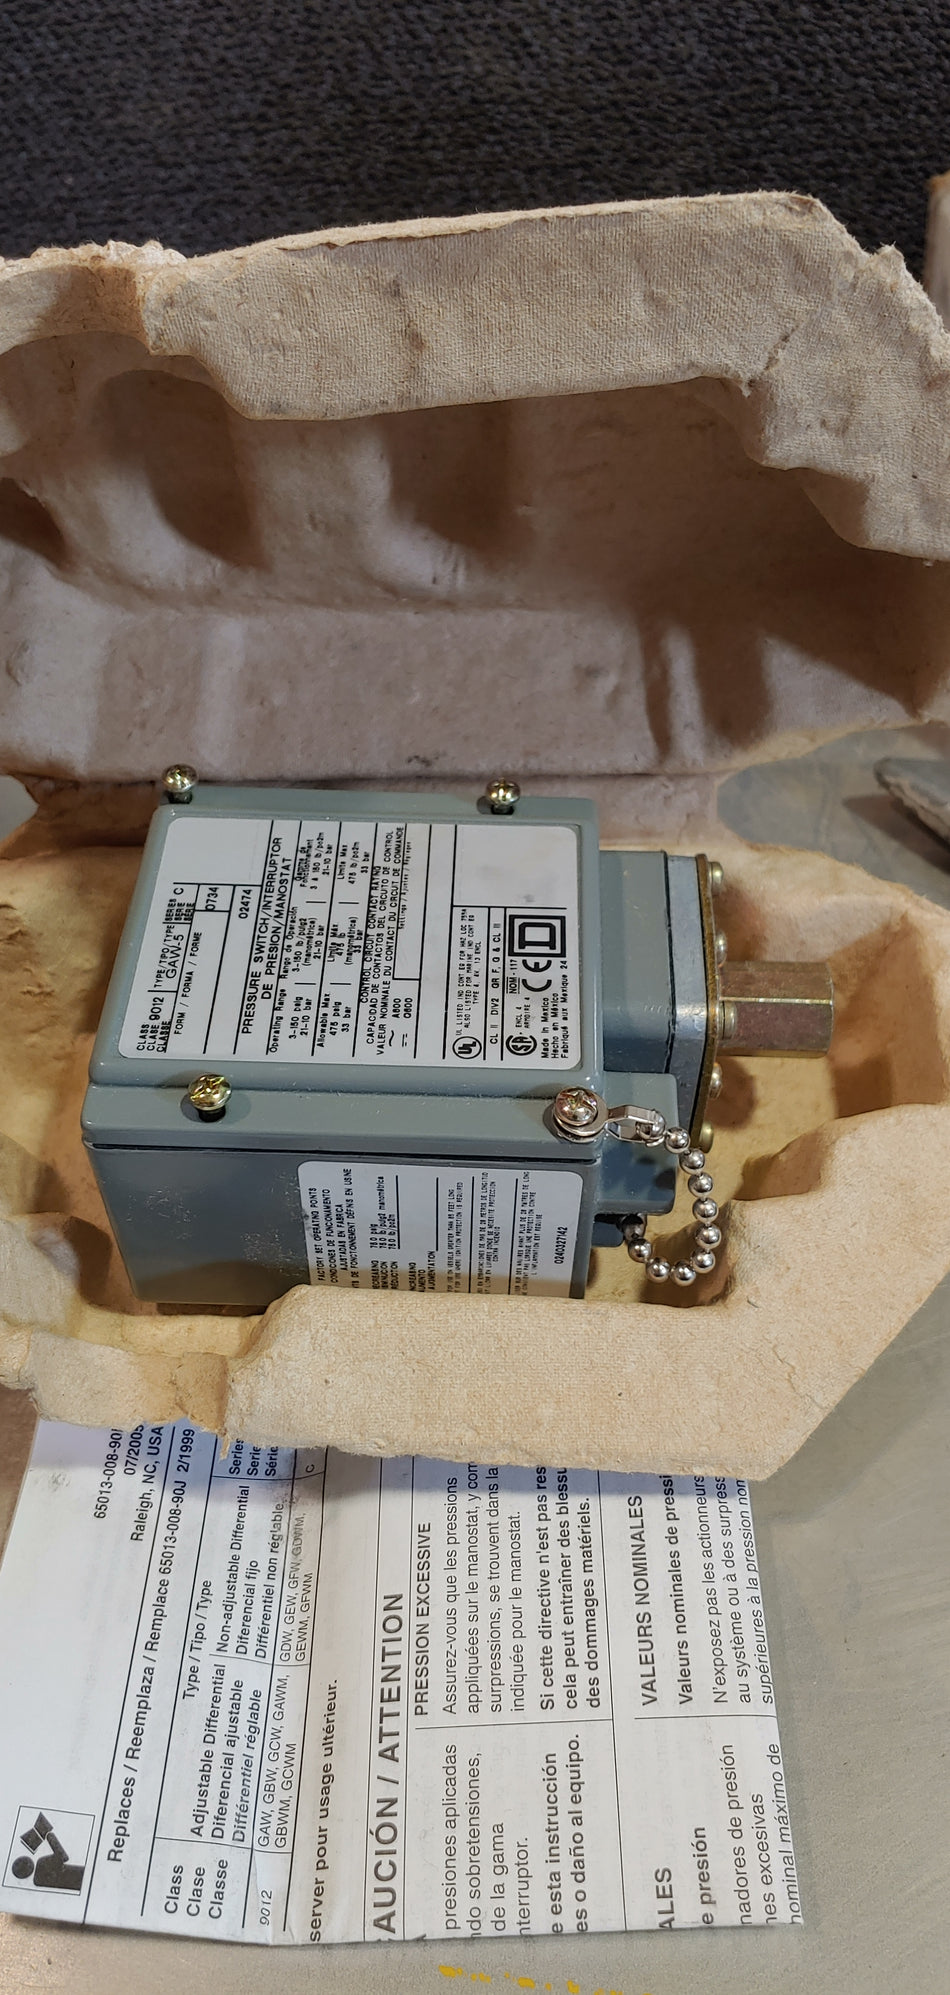 Square D pressure switch Class:9012 Type: GAW-5 series:C